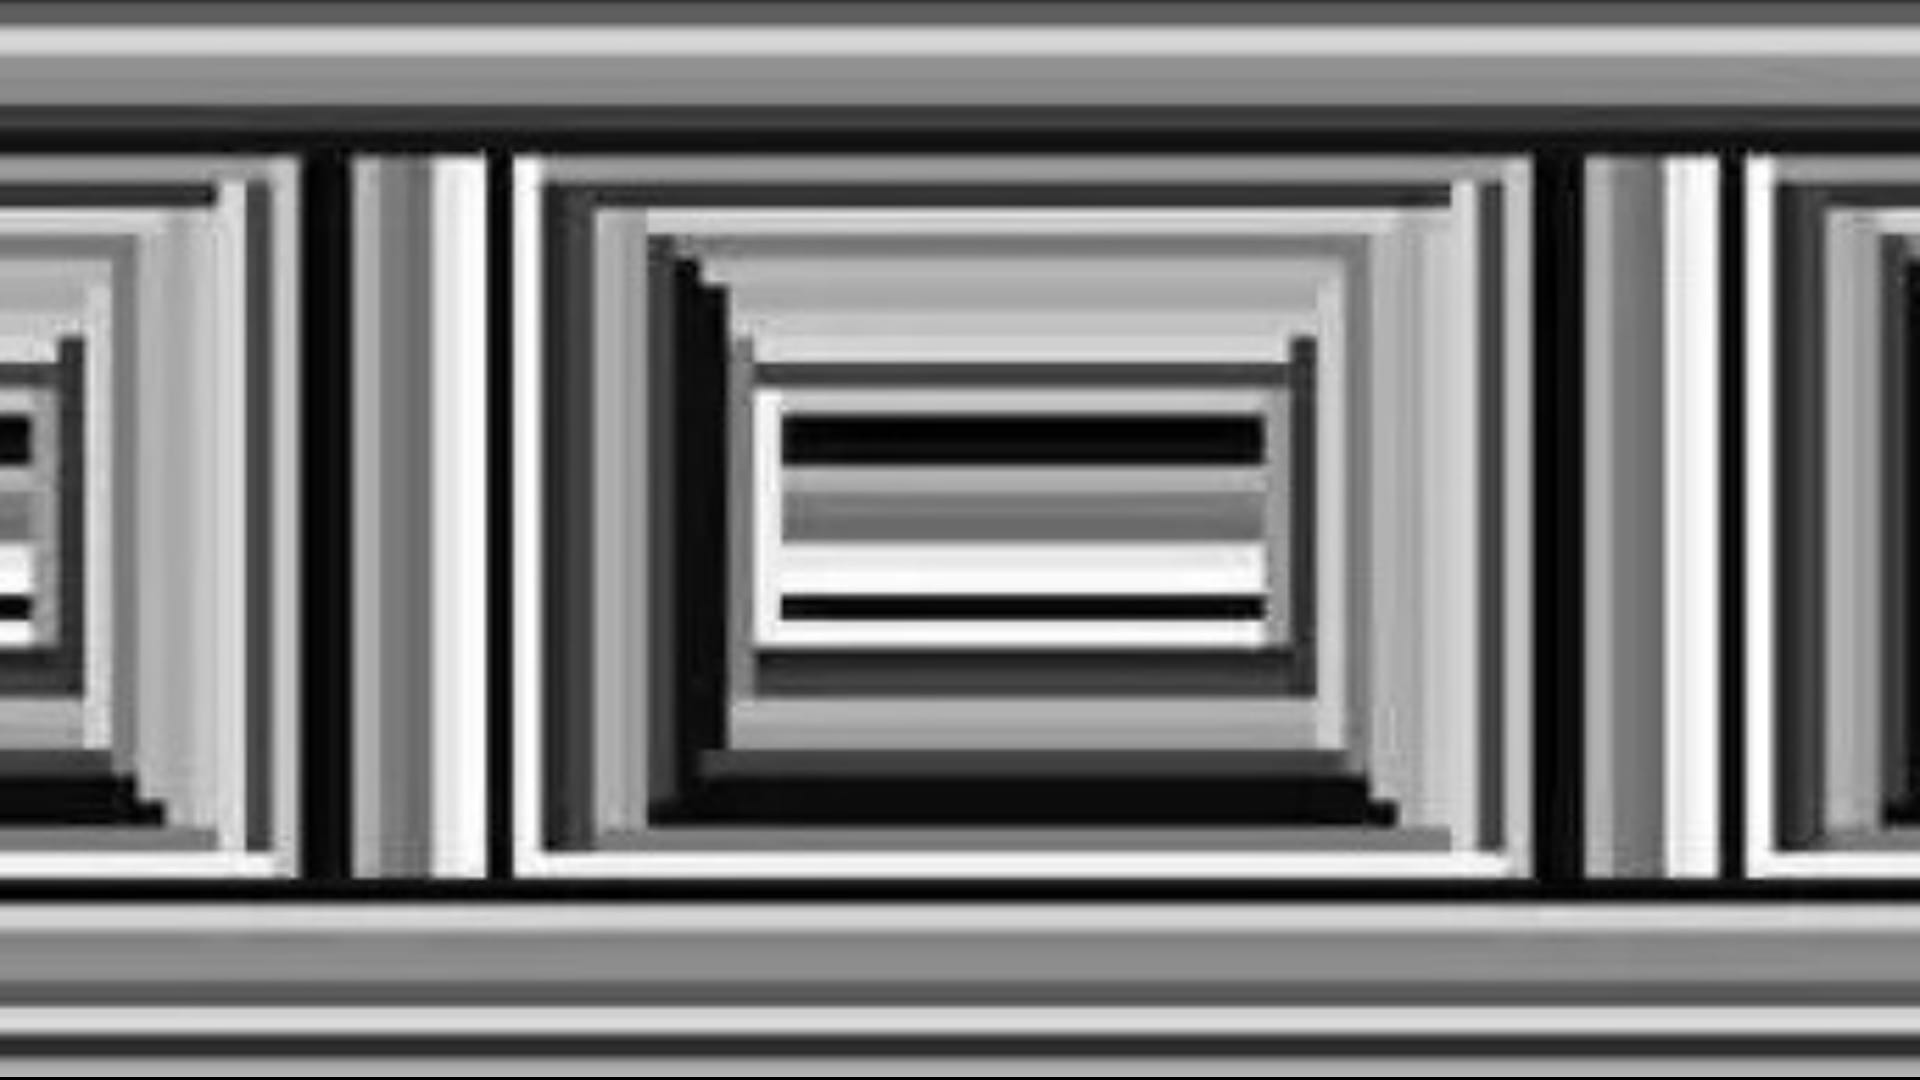 Mind-blowing optical illusion transforms before your eyes but 1% CAN'T see it - can you?